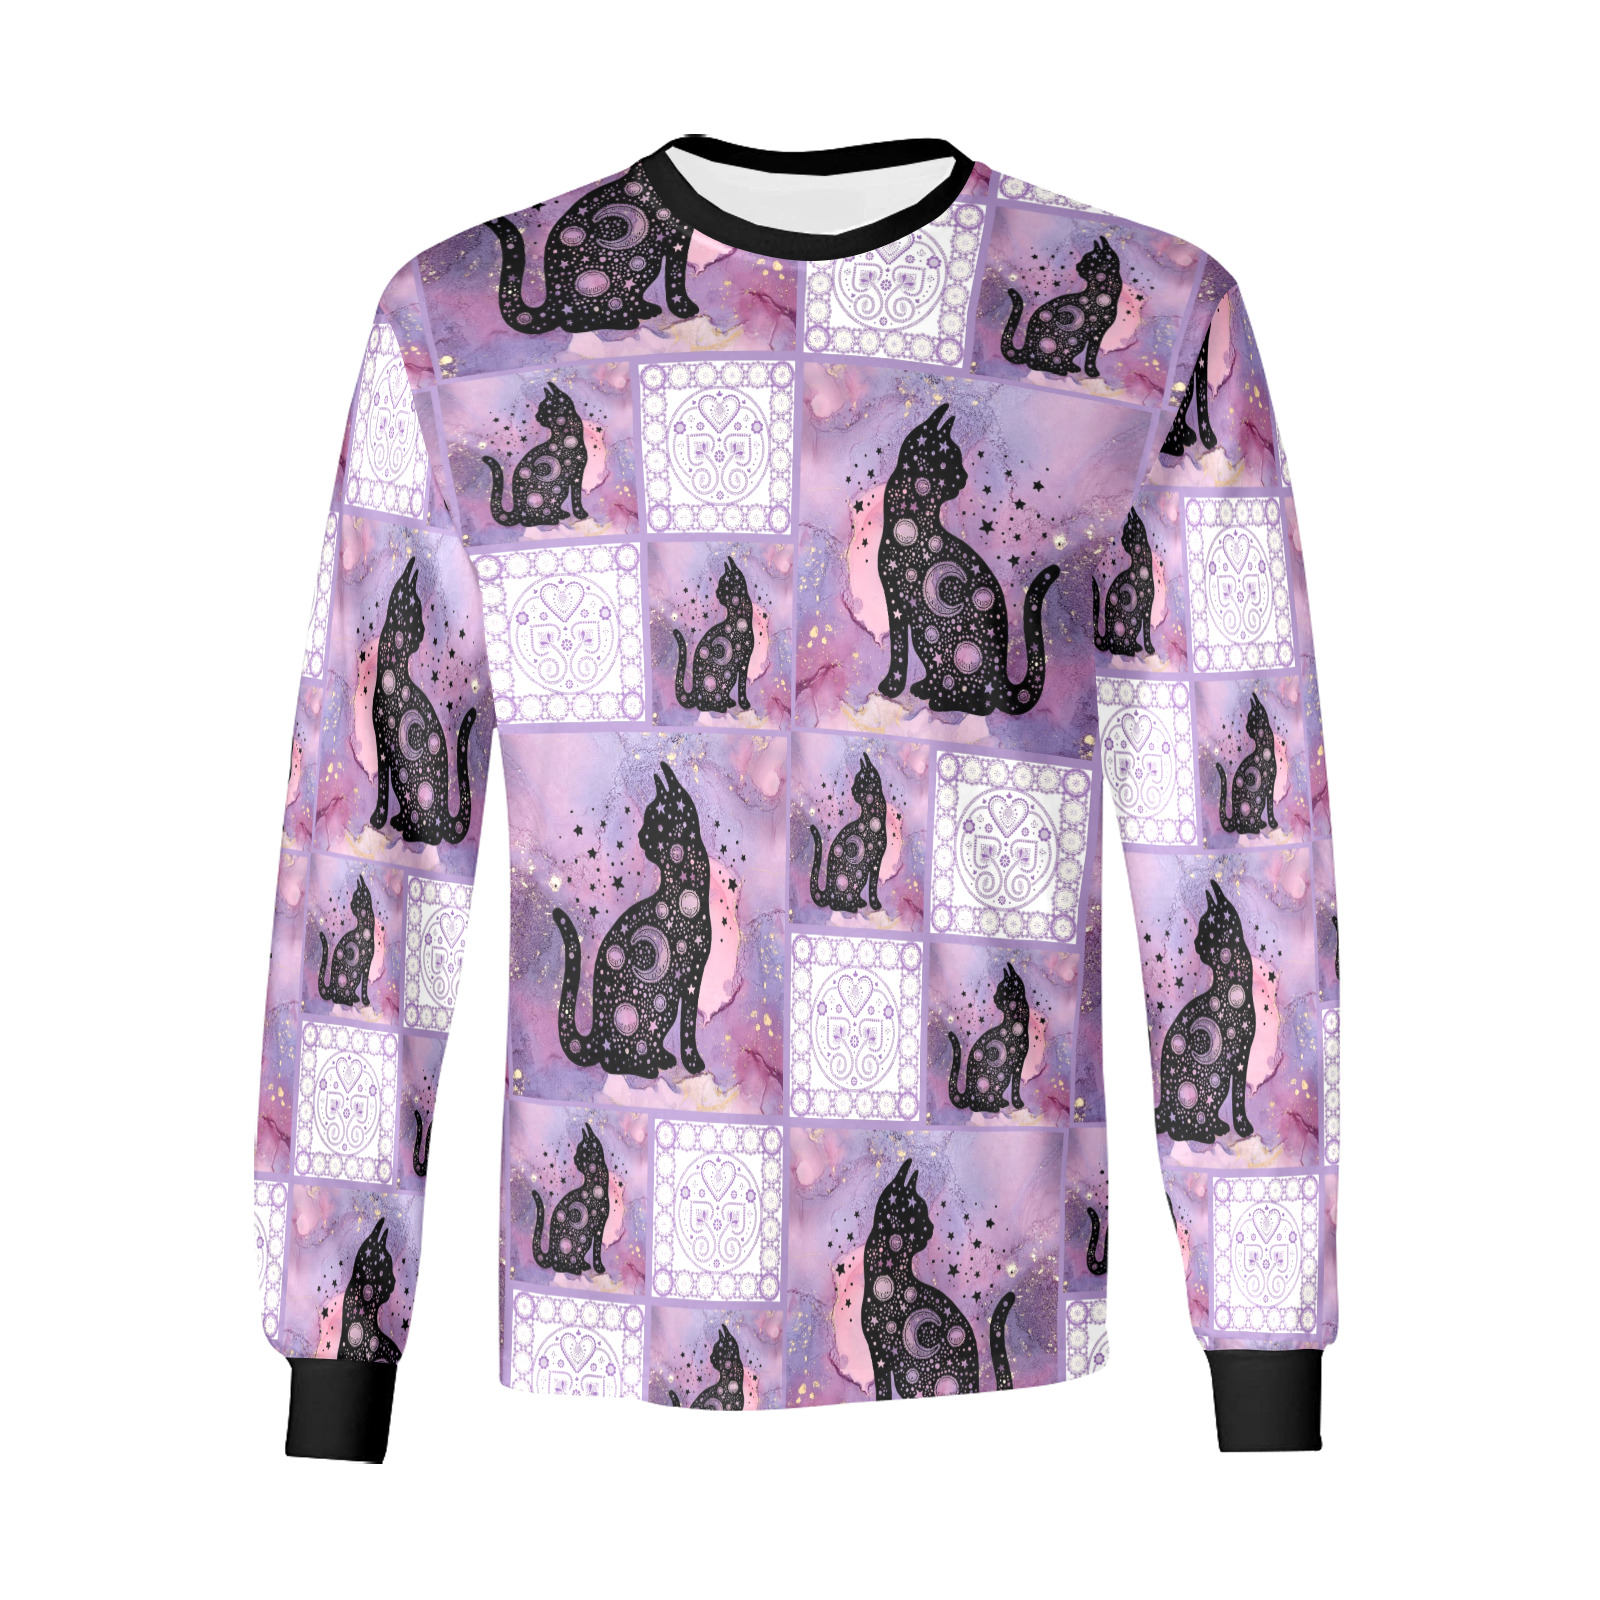 Purple Cosmic Cats Patchwork Pattern Kids' All Over Print Long Sleeve T-shirt (Model T51)